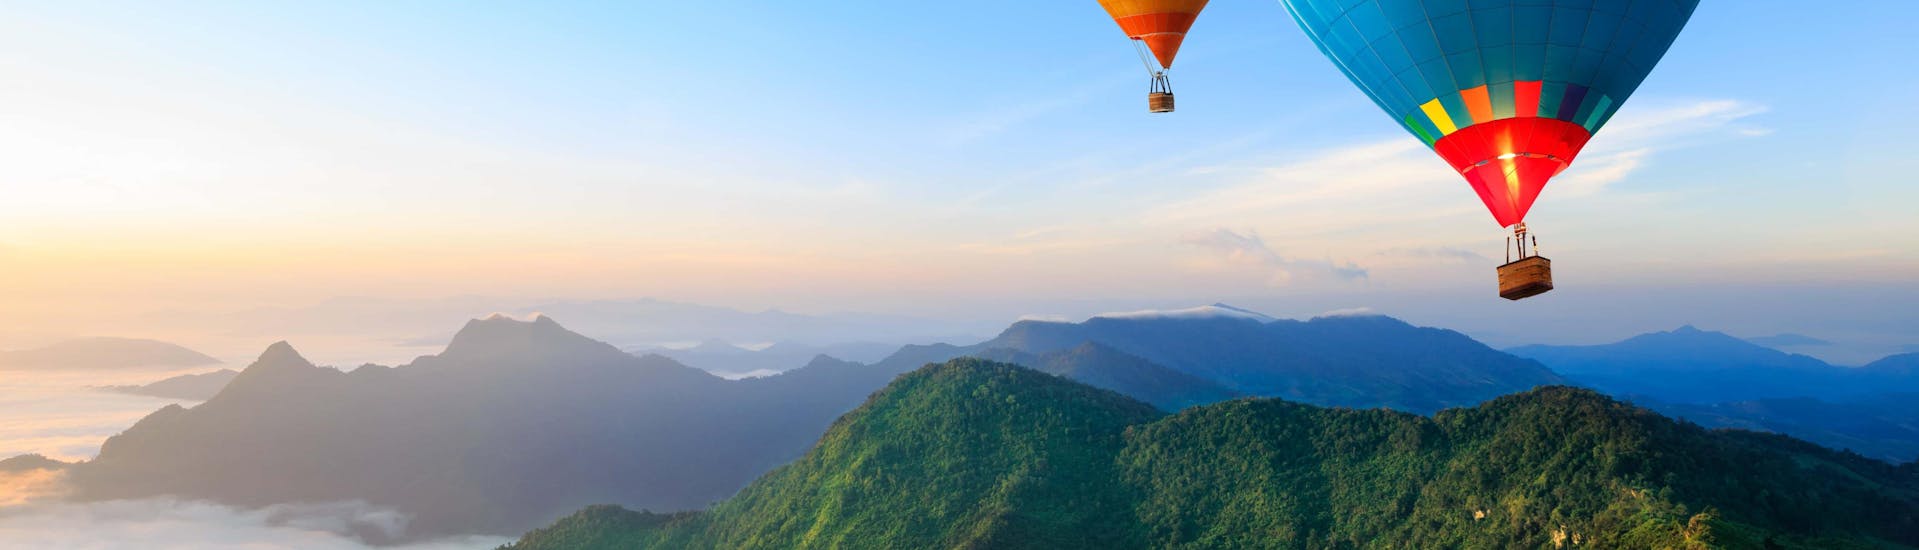 2 hot air balloons flying over a mountain landscape near the sea.